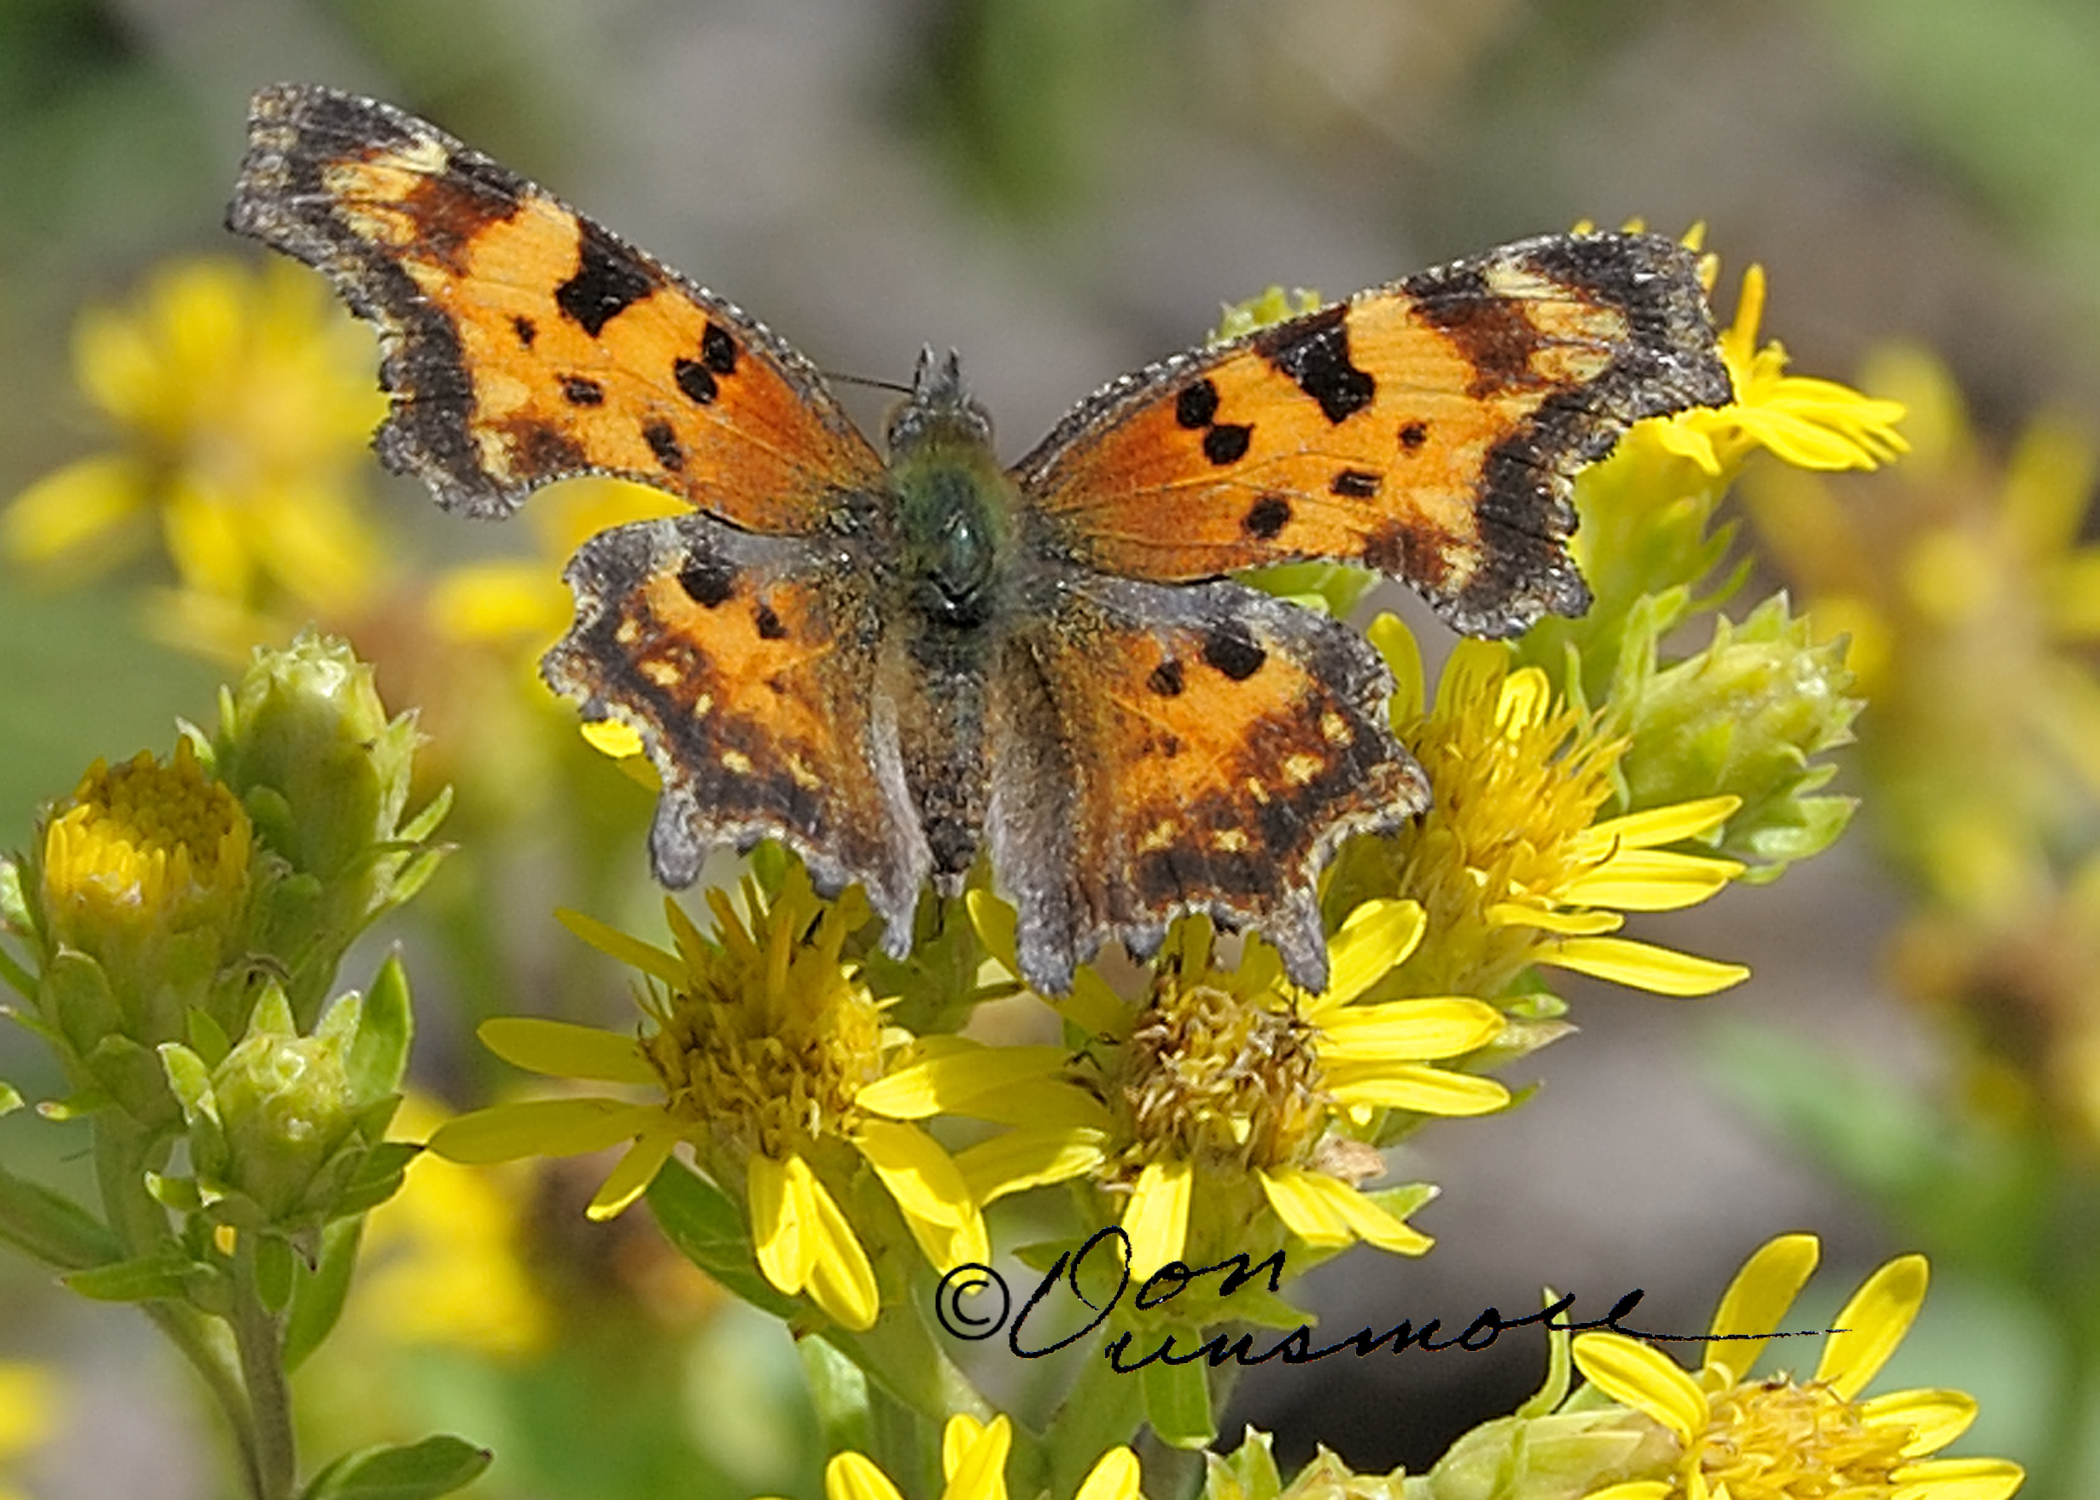 Green Comma Polygonia faunus (W.H. Edwards, 1862) | Butterflies and ...